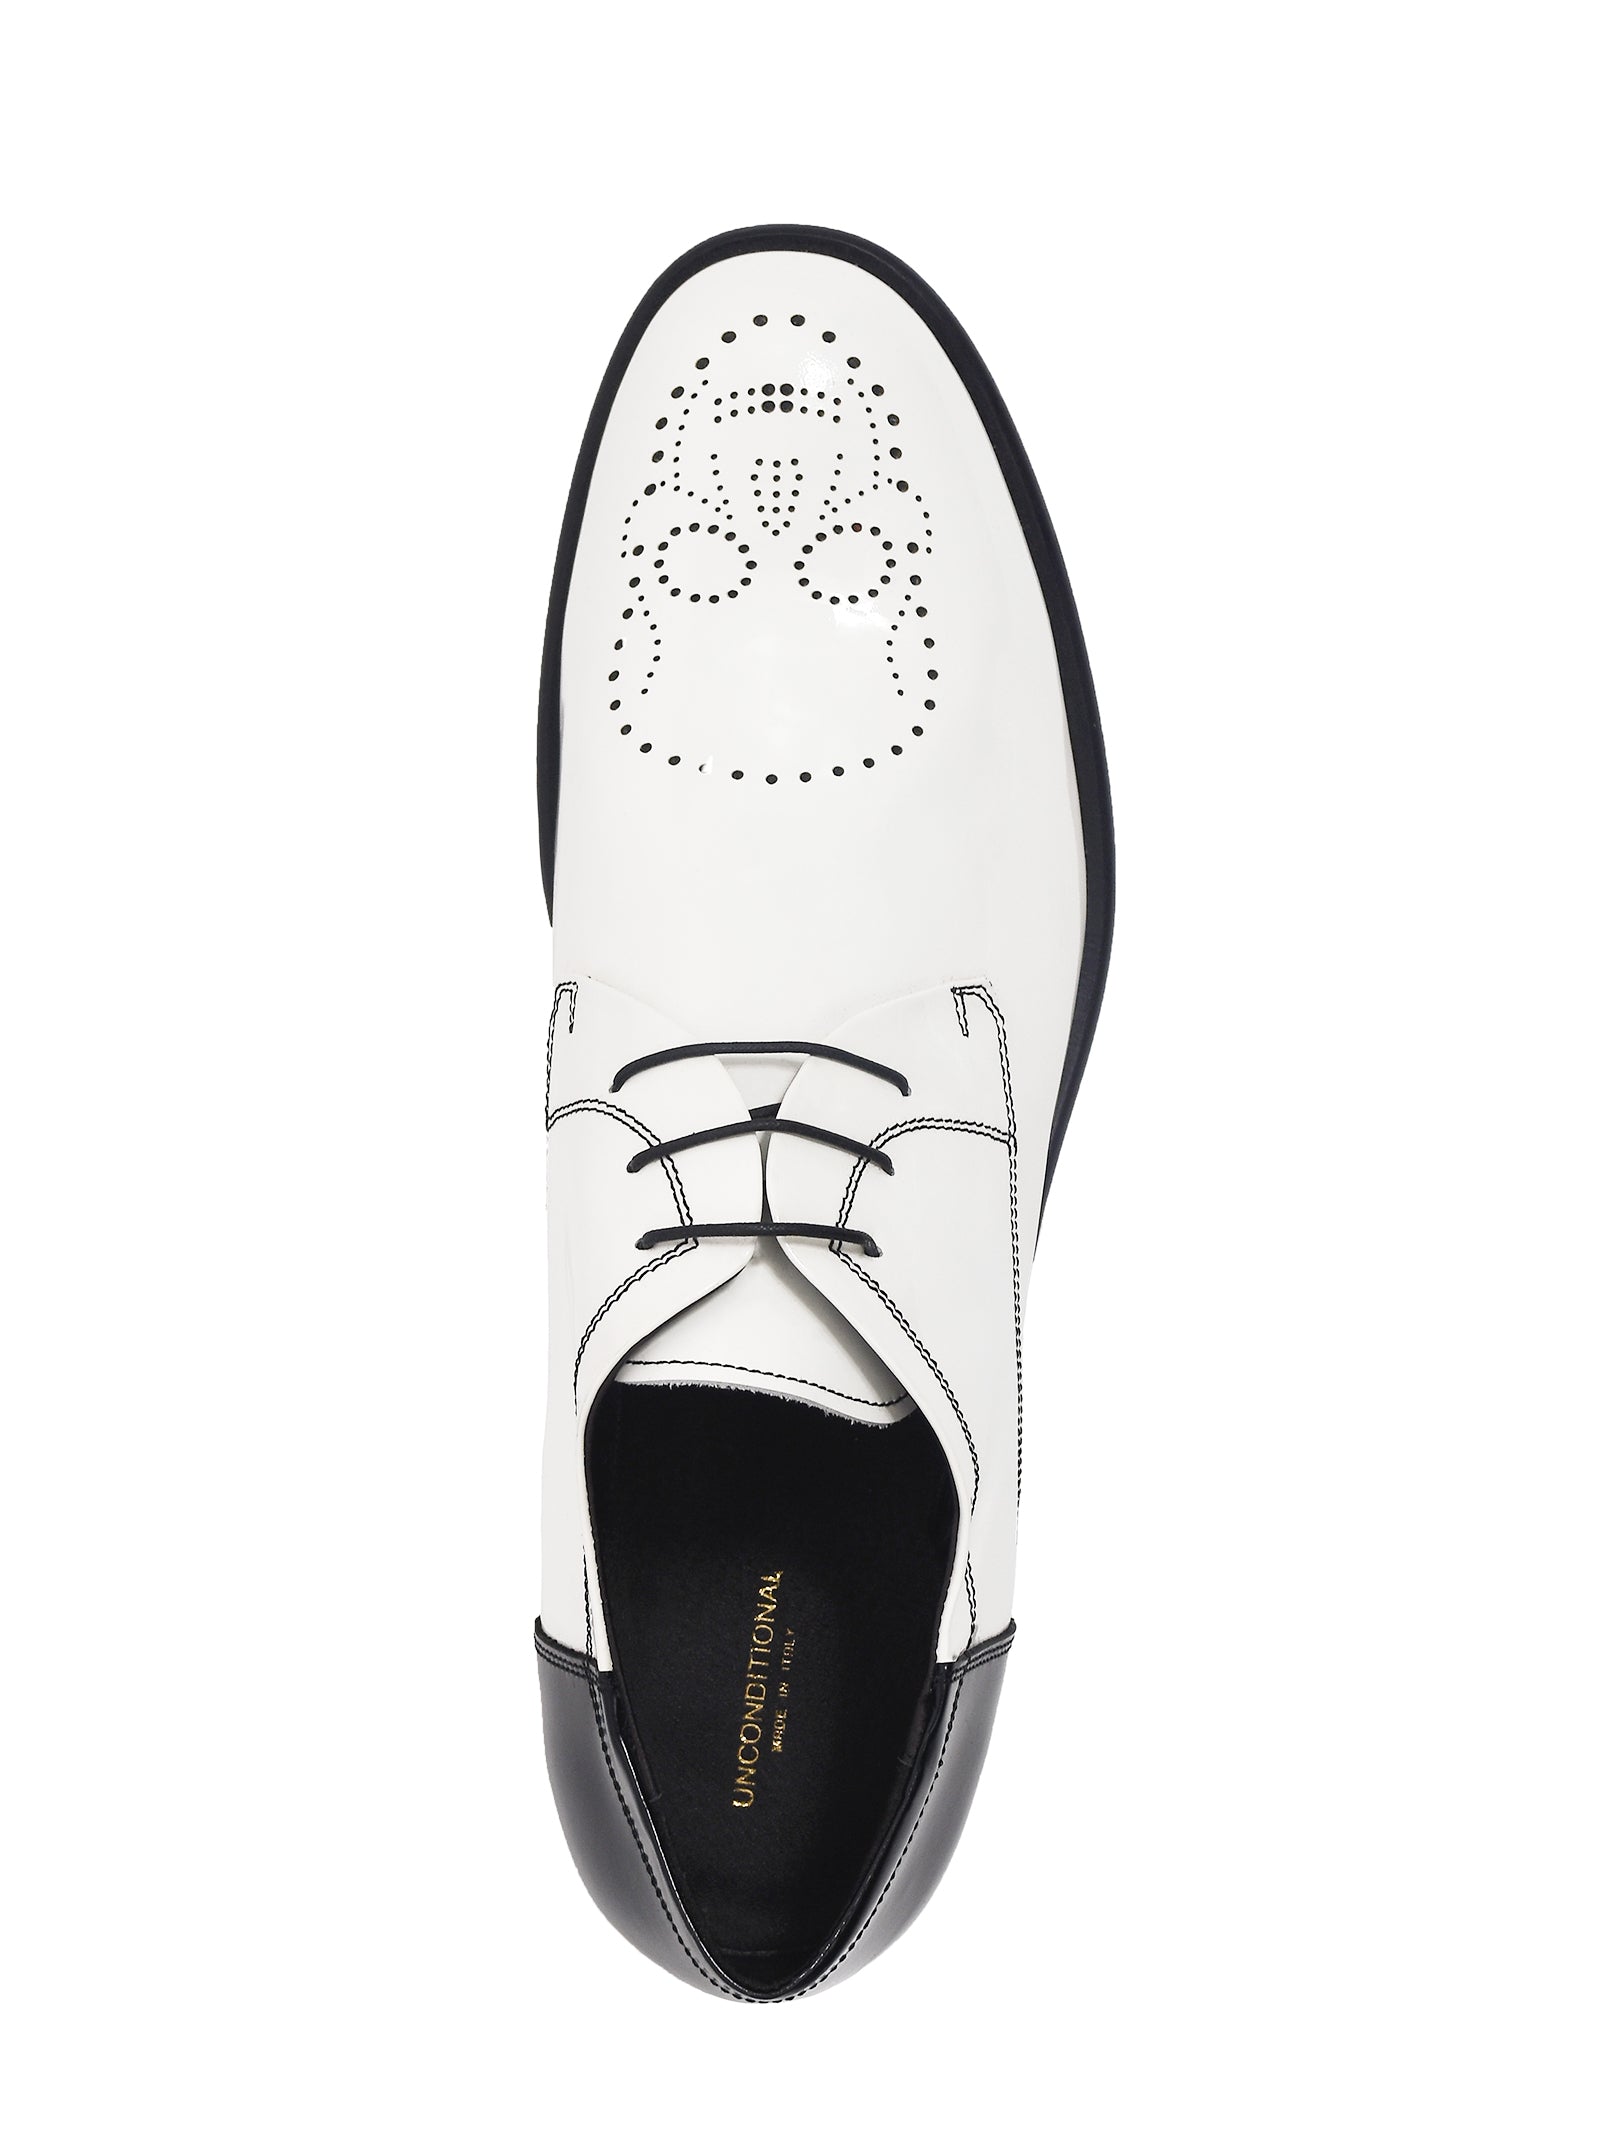 UNCONDITIONAL MENS LEATHER SKULL SHOES IN WHITE